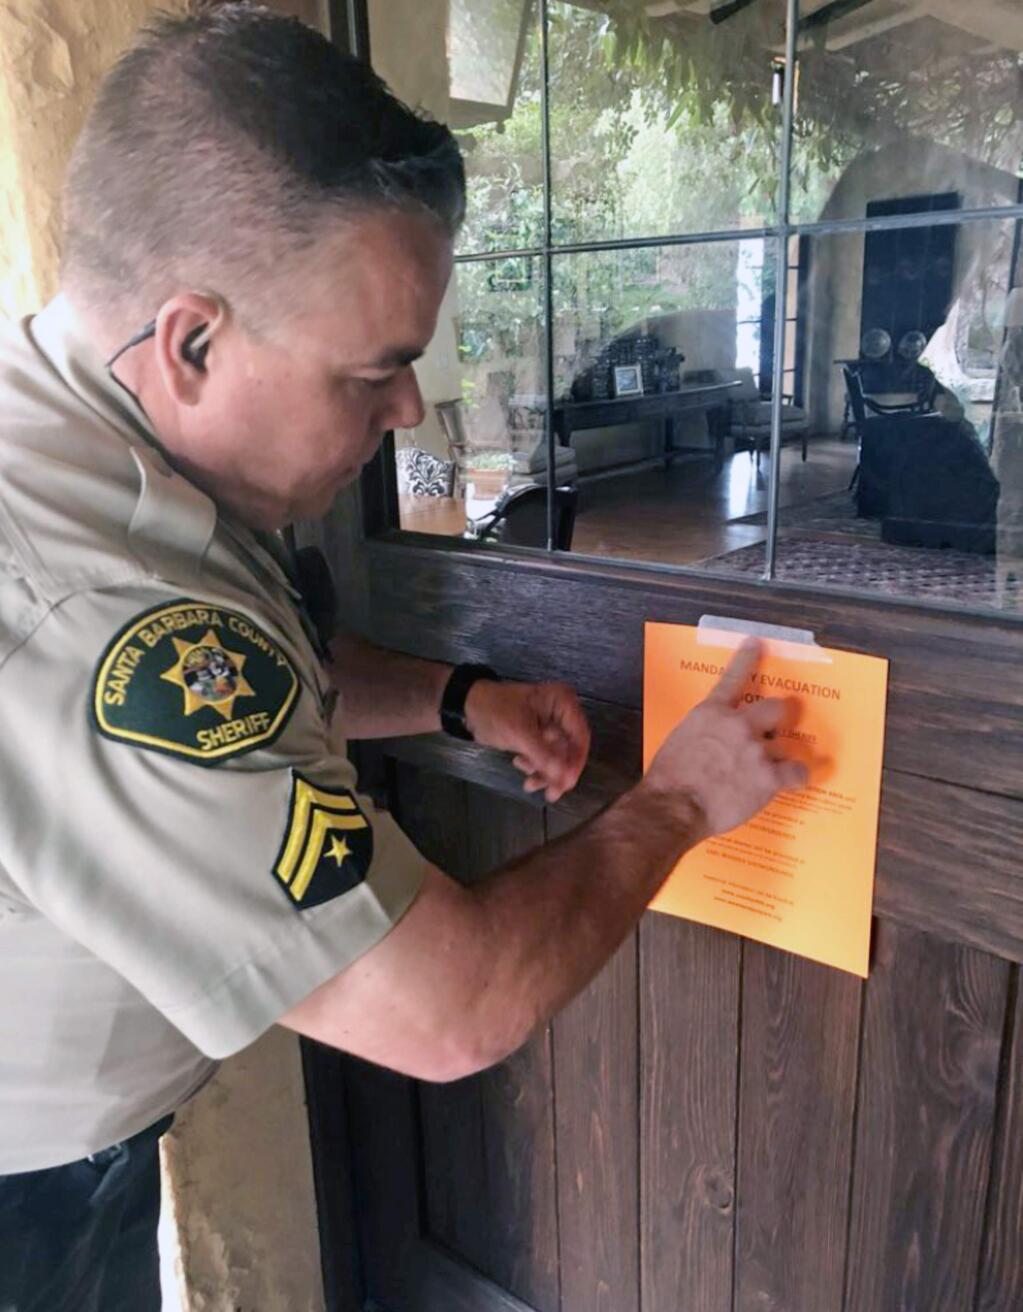 Santa Barbara County Sheriff's Deputy Mike Harris posts a notice on a home near Carpinteria, Calif., advising of the mandatory evacuation notice due to forecast rain and possible debris flow due to the recent Thomas Fire Thursday, March 1, 2018. A major winter storm swept south through California on Thursday, bringing heavy snow and strong winds to mountains and steady rain elsewhere, while prompting mandatory evacuations for coastal areas to the south that were devastated by deadly mudslides in January. As many as 30,000 people were ordered to leave an area of Santa Barbara County before the storm arrived early Friday. (Mike Eliason/Santa Barbara County Fire Department via AP)